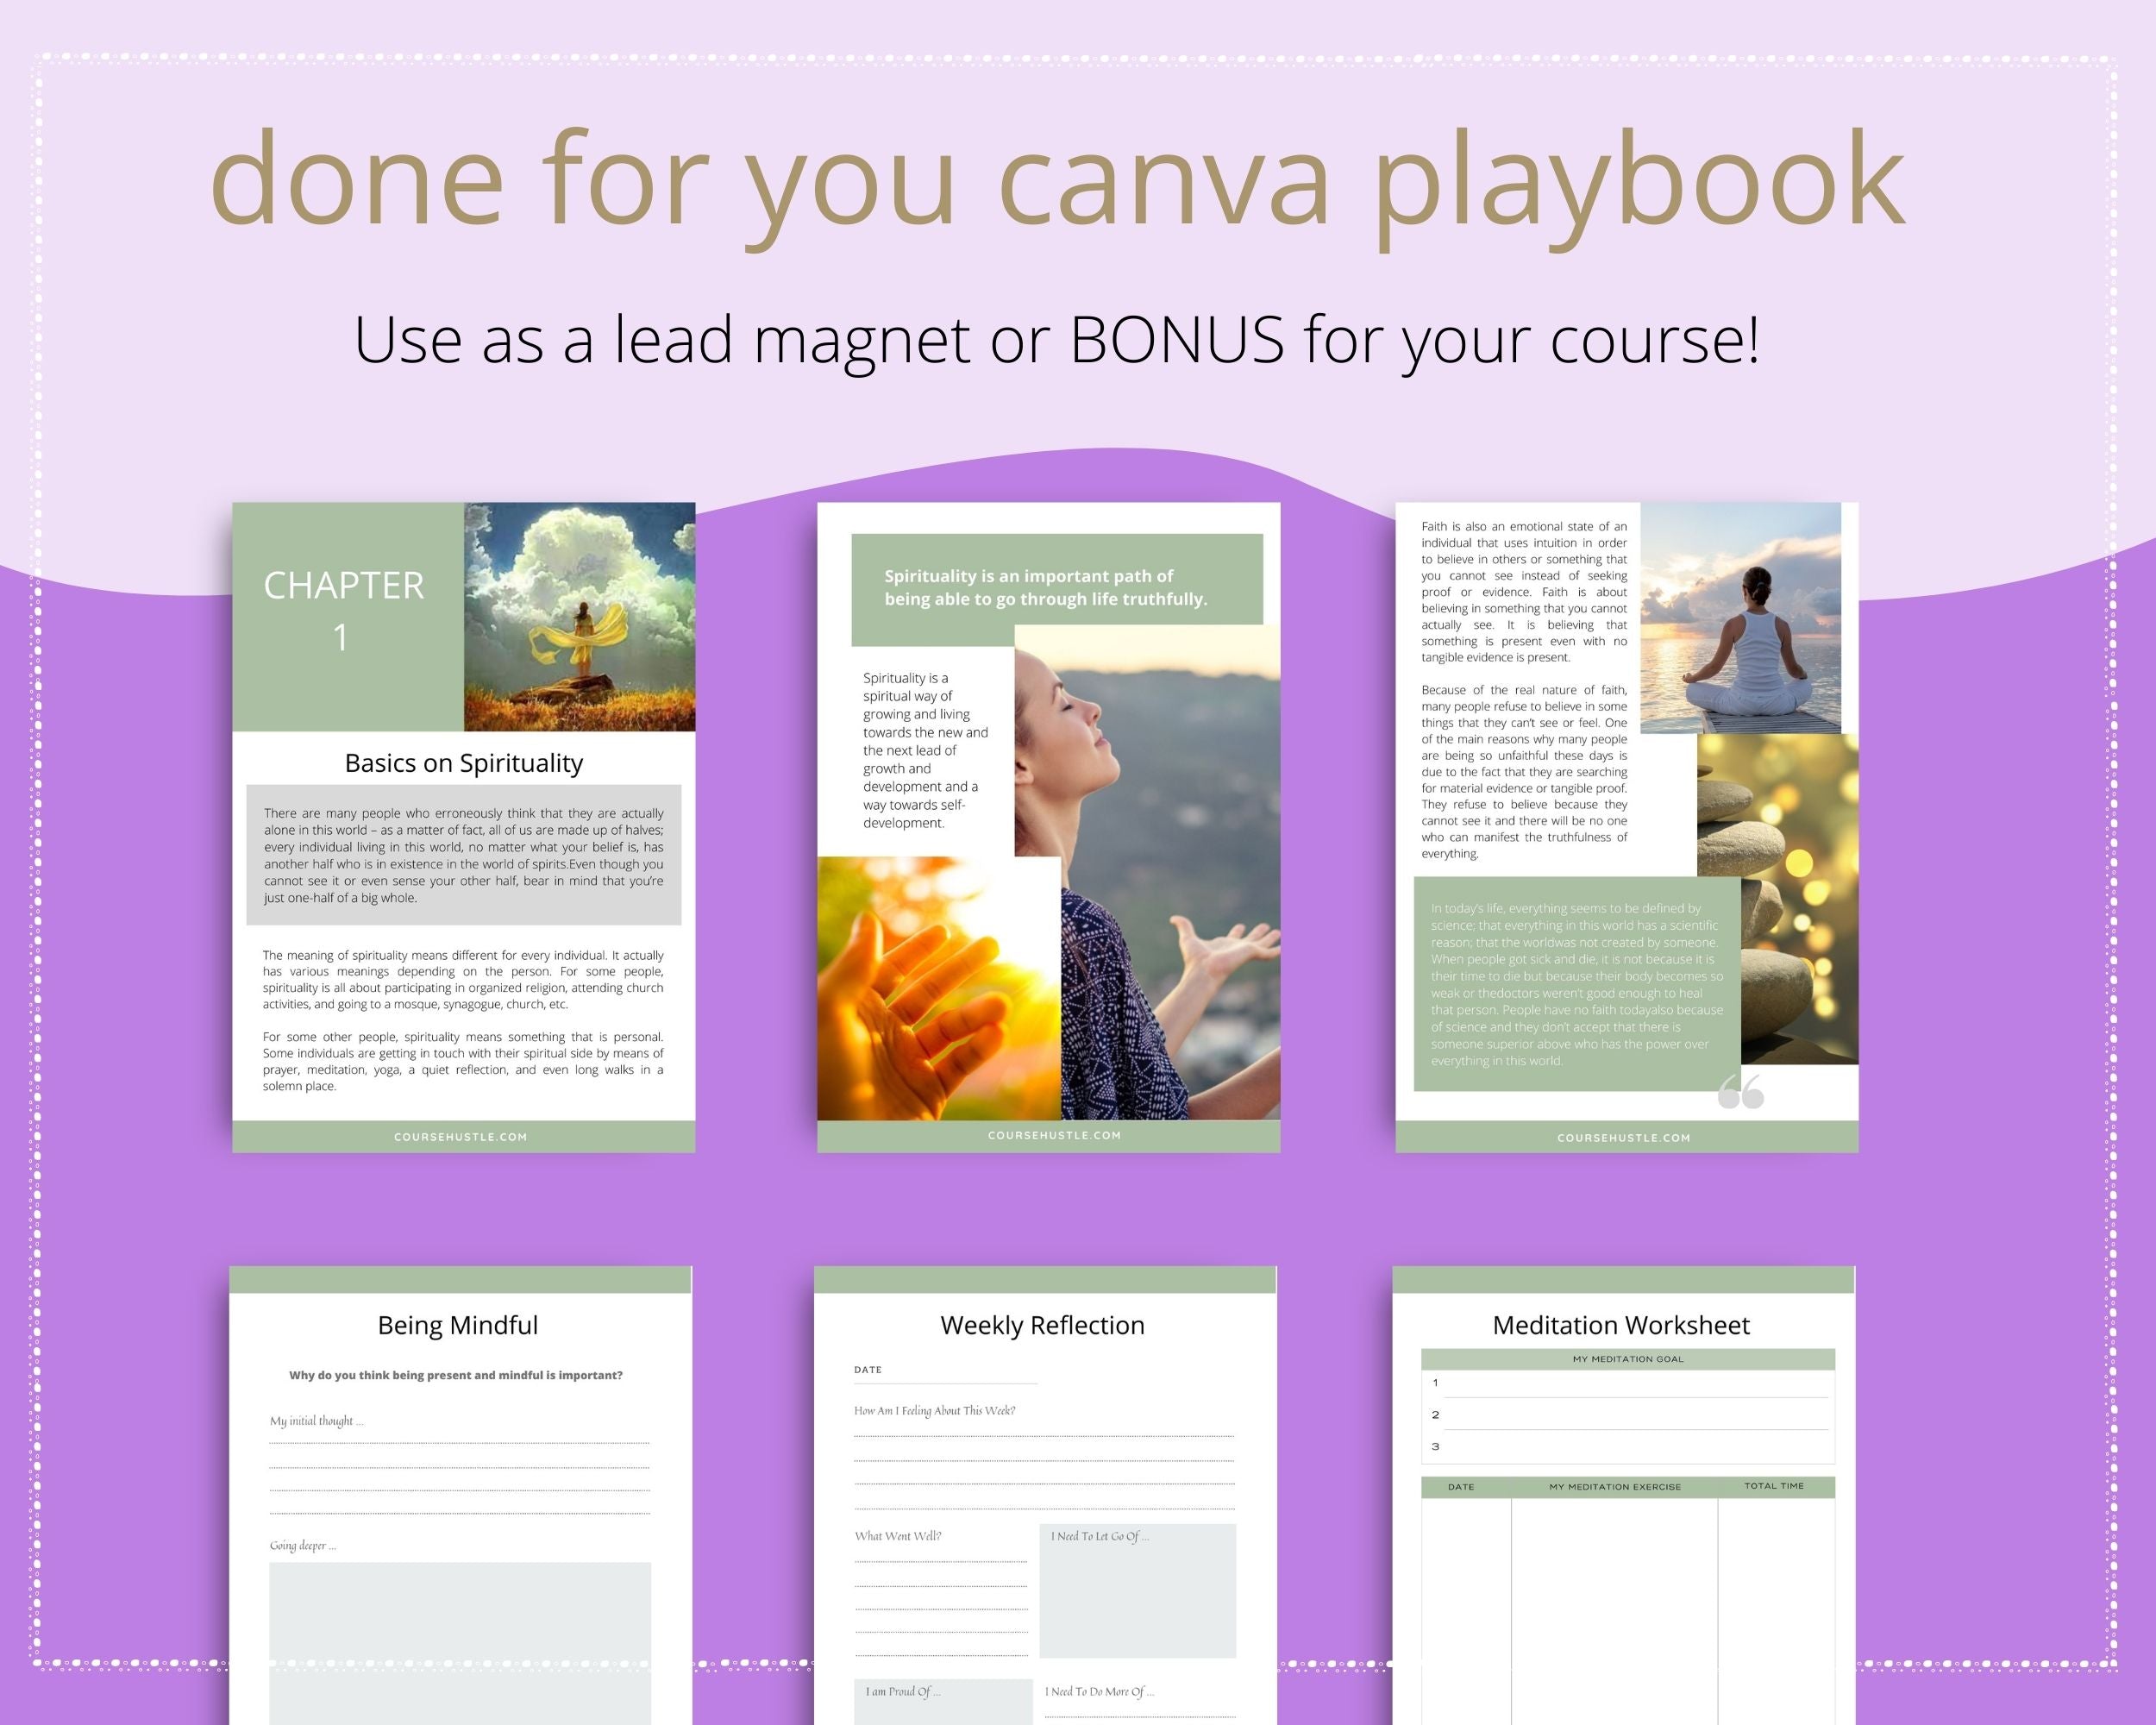 Done for You Spirituality Playbook in Canva | Editable A4 Size Canva Template